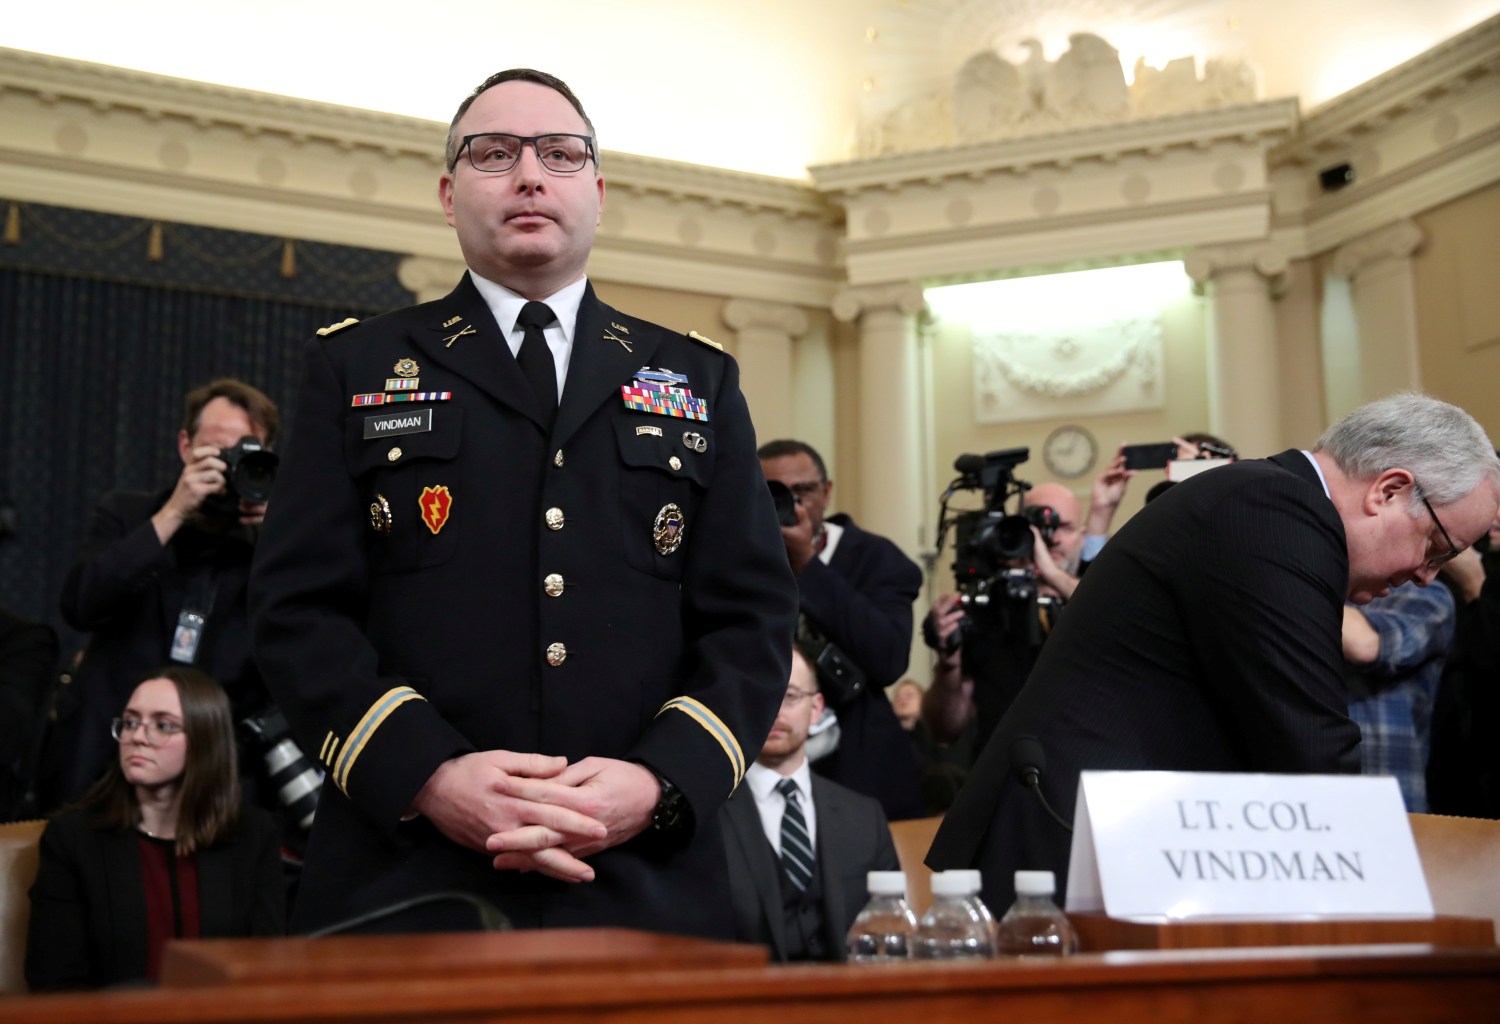 FILE PHOTO: Lt. Colonel Alexander Vindman, director for European Affairs at the National Security Council, arrives to testify before a House Intelligence Committee hearing as part of the impeachment inquiry into U.S. President Donald Trump on Capitol Hill in Washington, U.S., November 19, 2019. REUTERS/Jonathan Ernst/File Photo